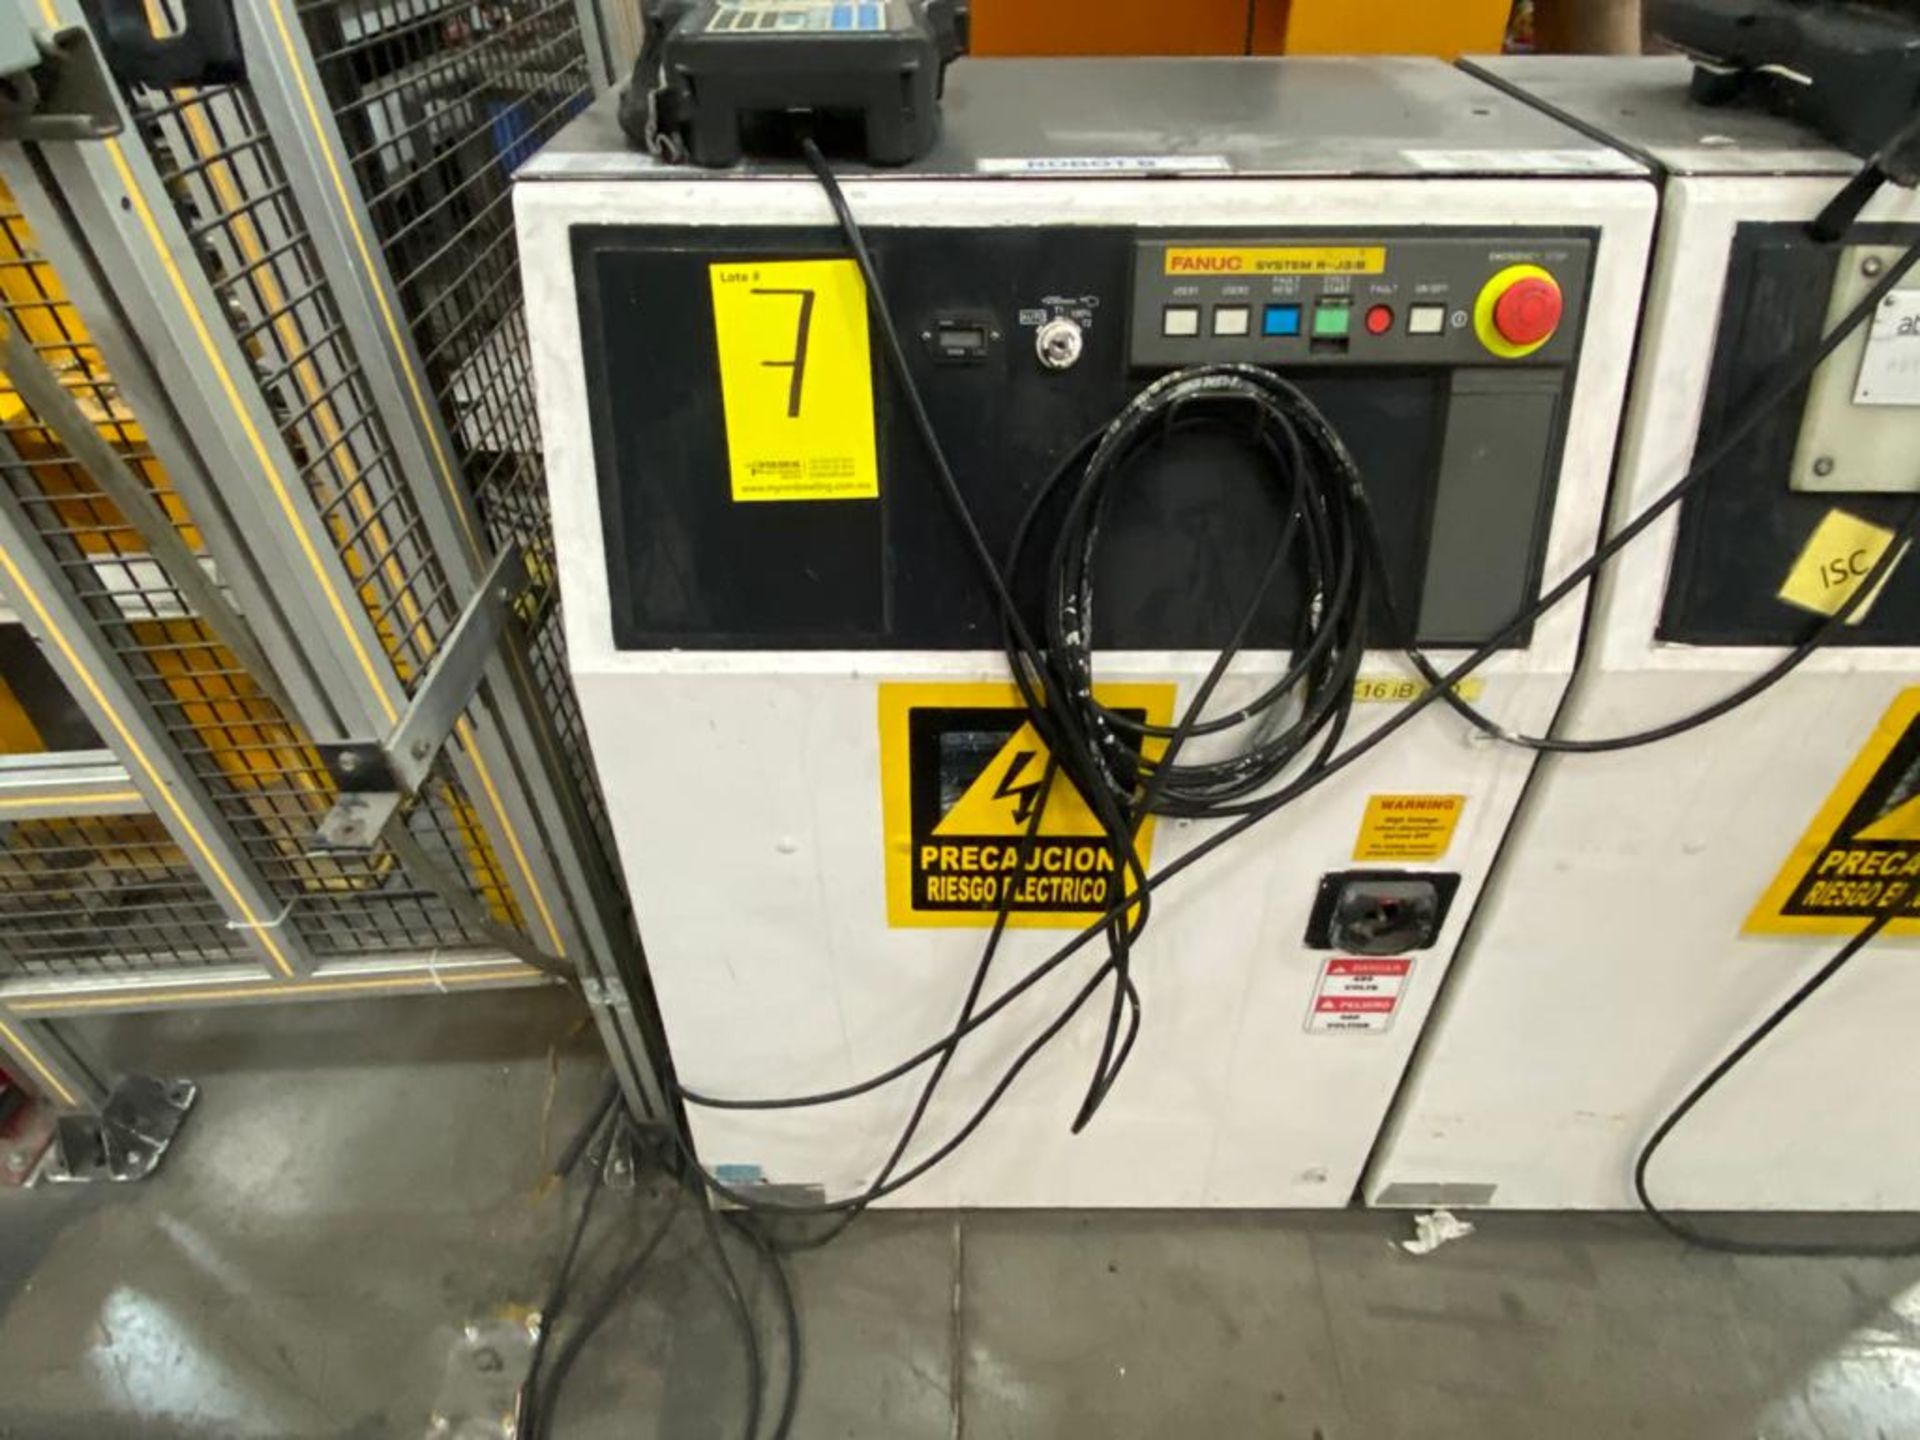 Fanuc articulated Robot, model M-16iB/20 - Image 18 of 27